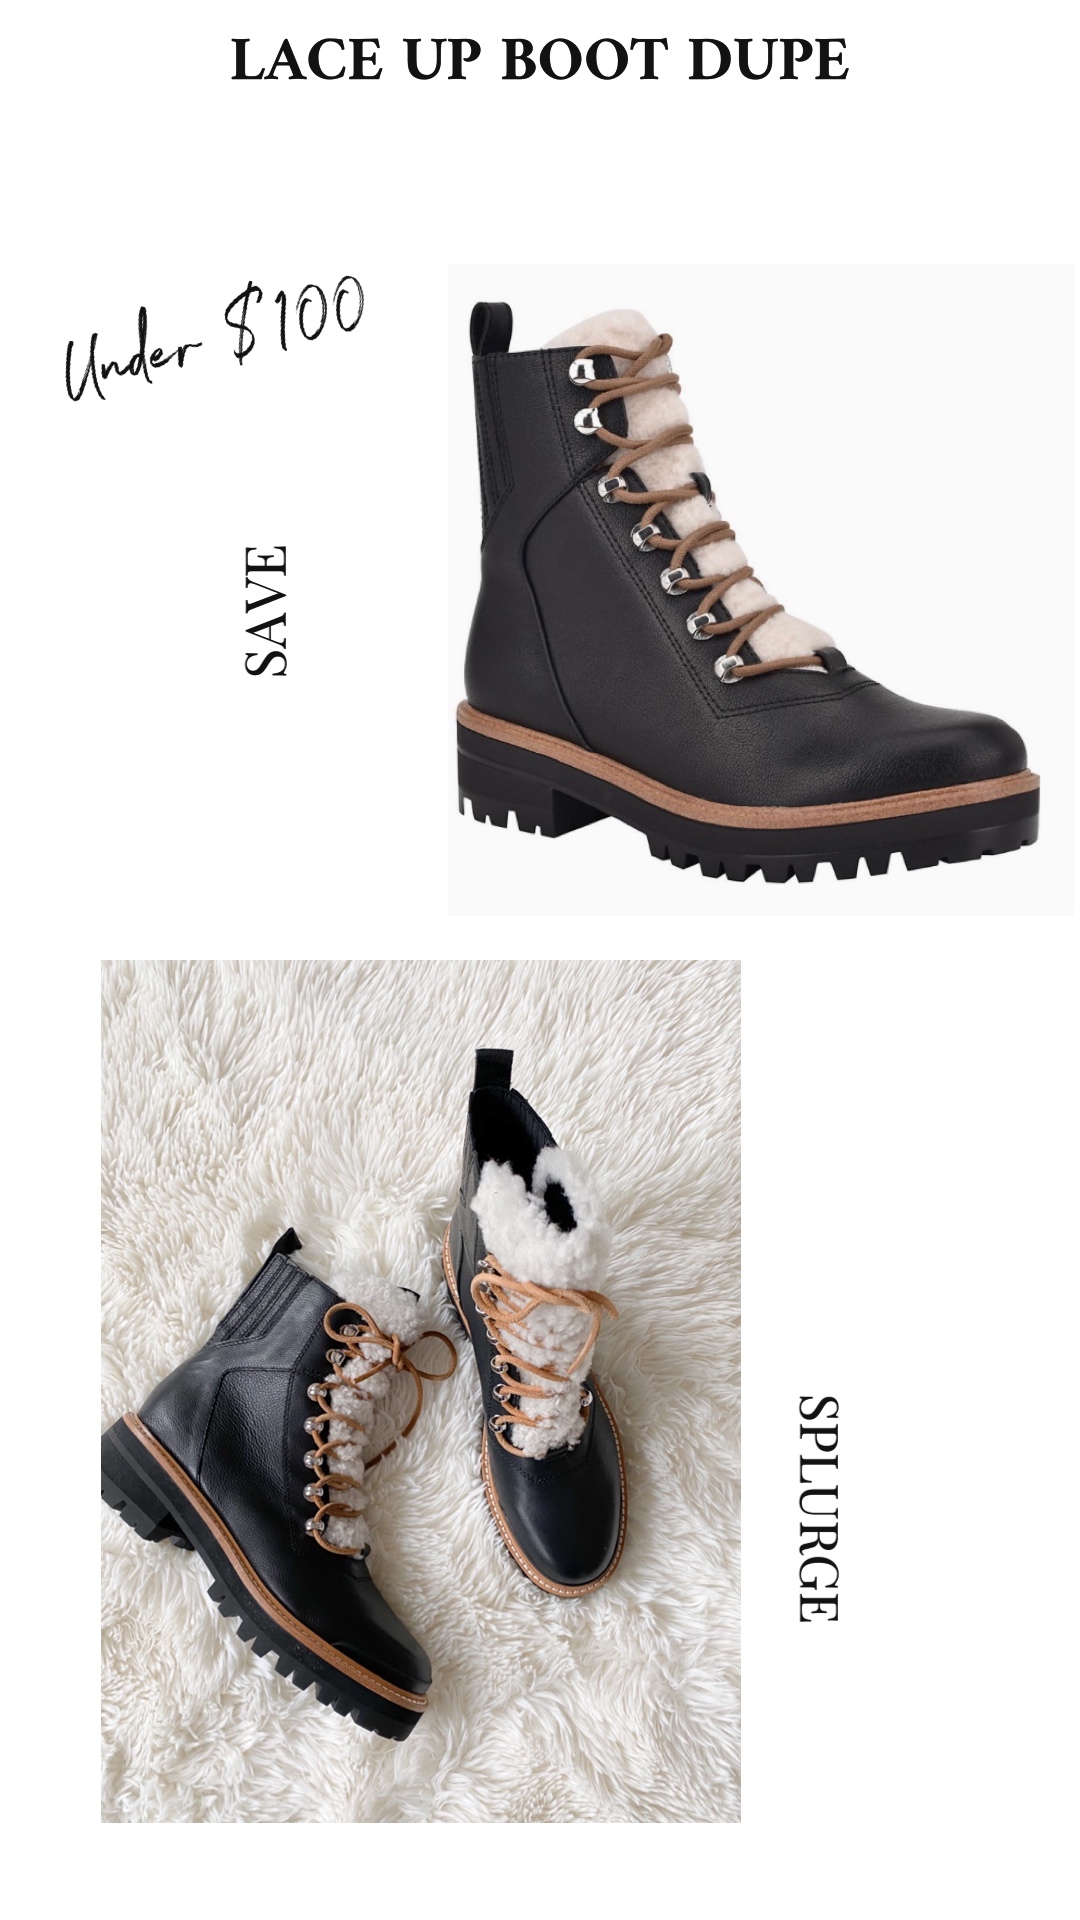 Black combat boots save vs splurge. Luxury dupes and steals, Marc Fischer lace up fur lined boots 